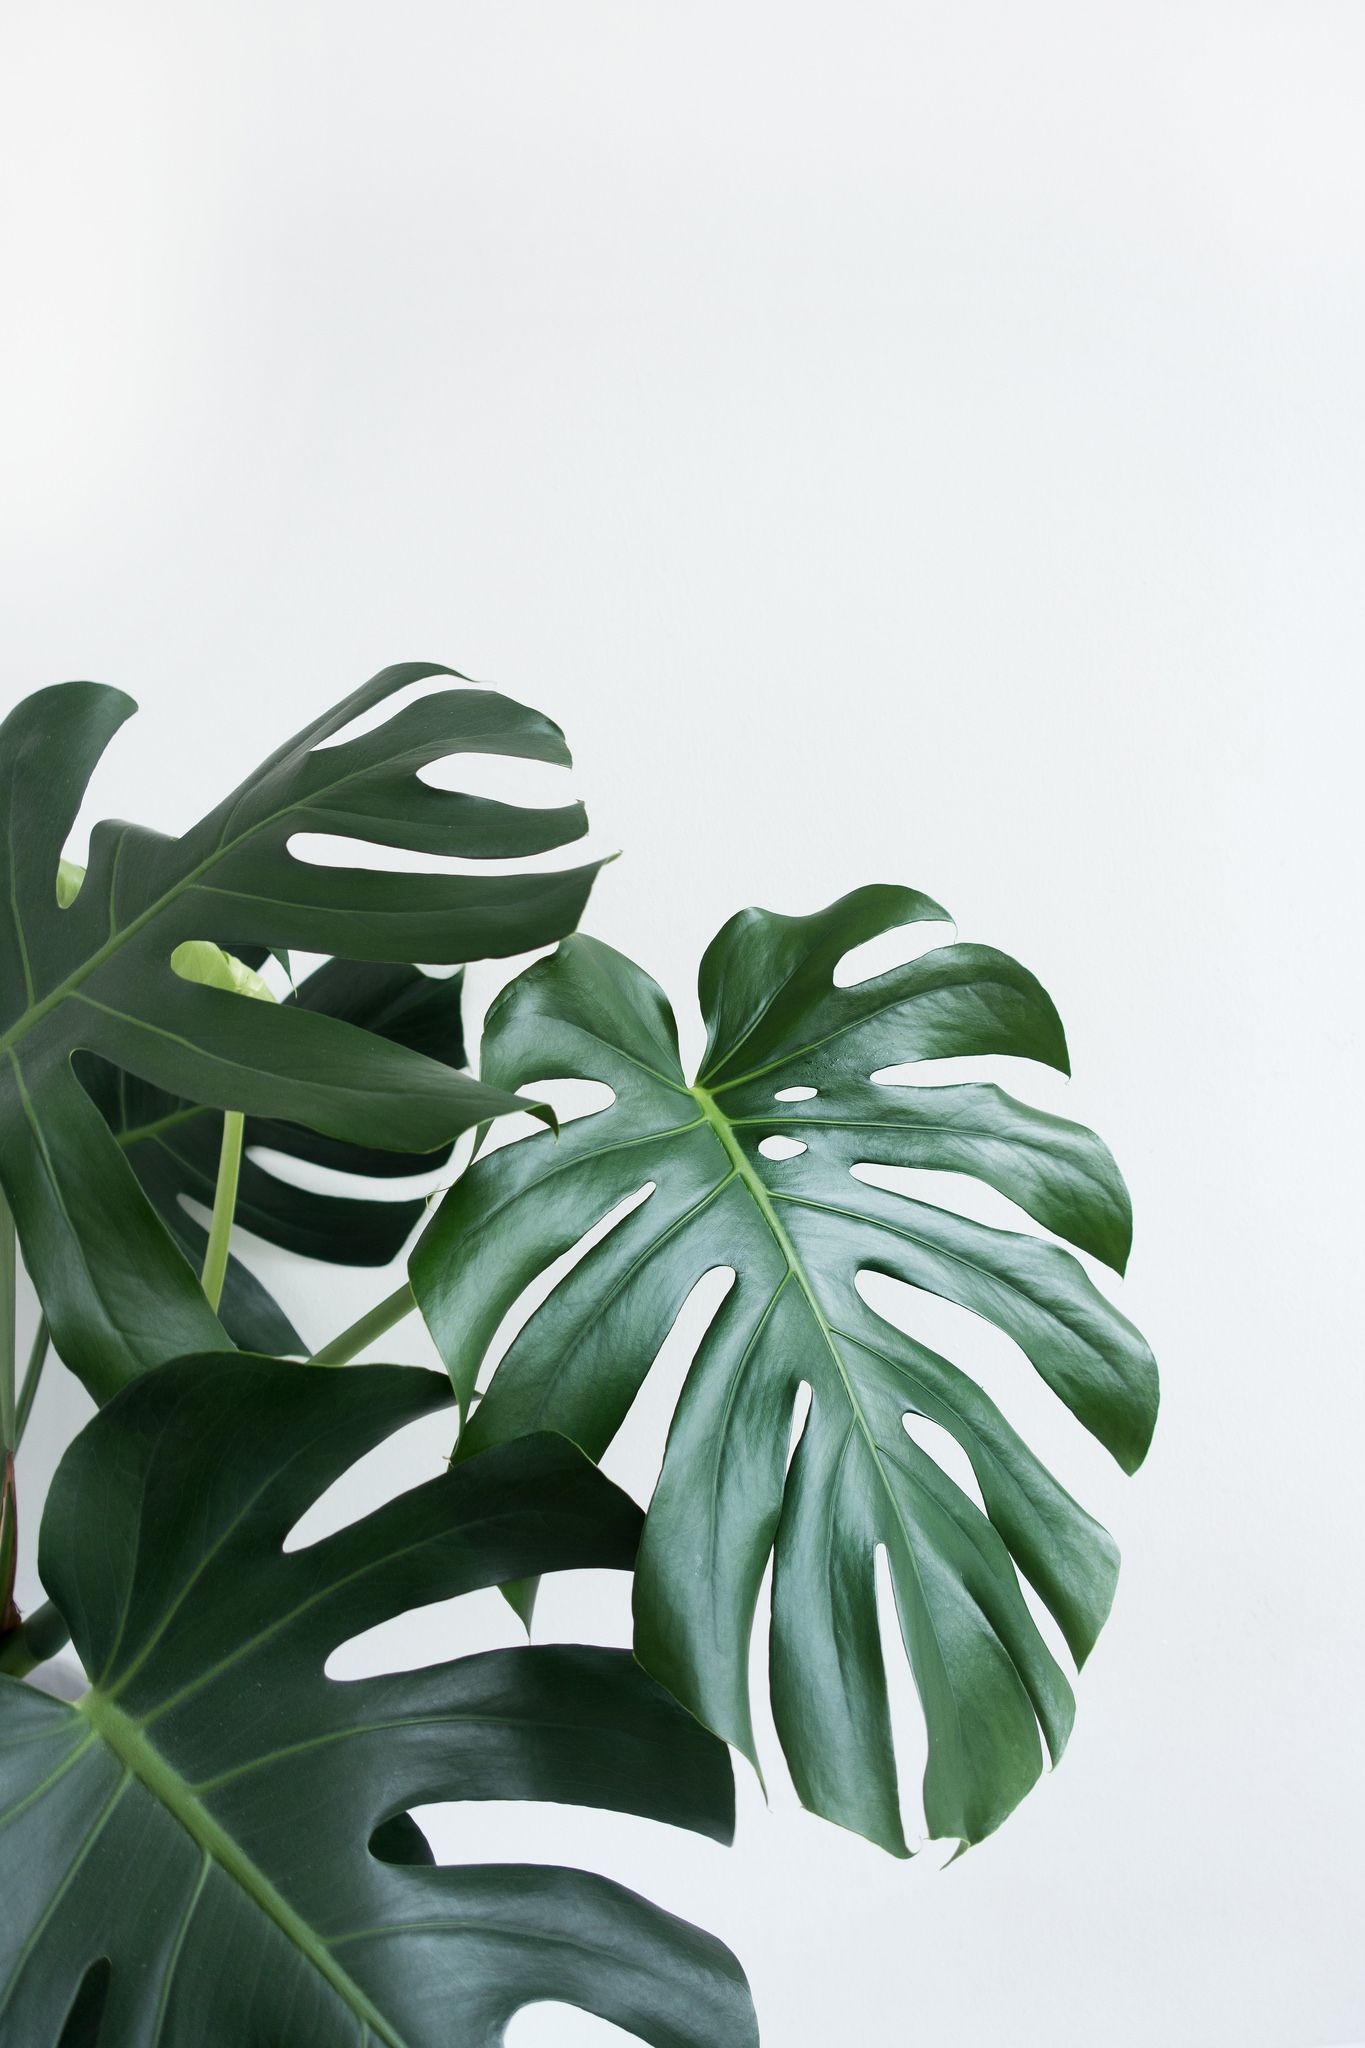 Plant Aesthetic Pictures  Download Free Images on Unsplash